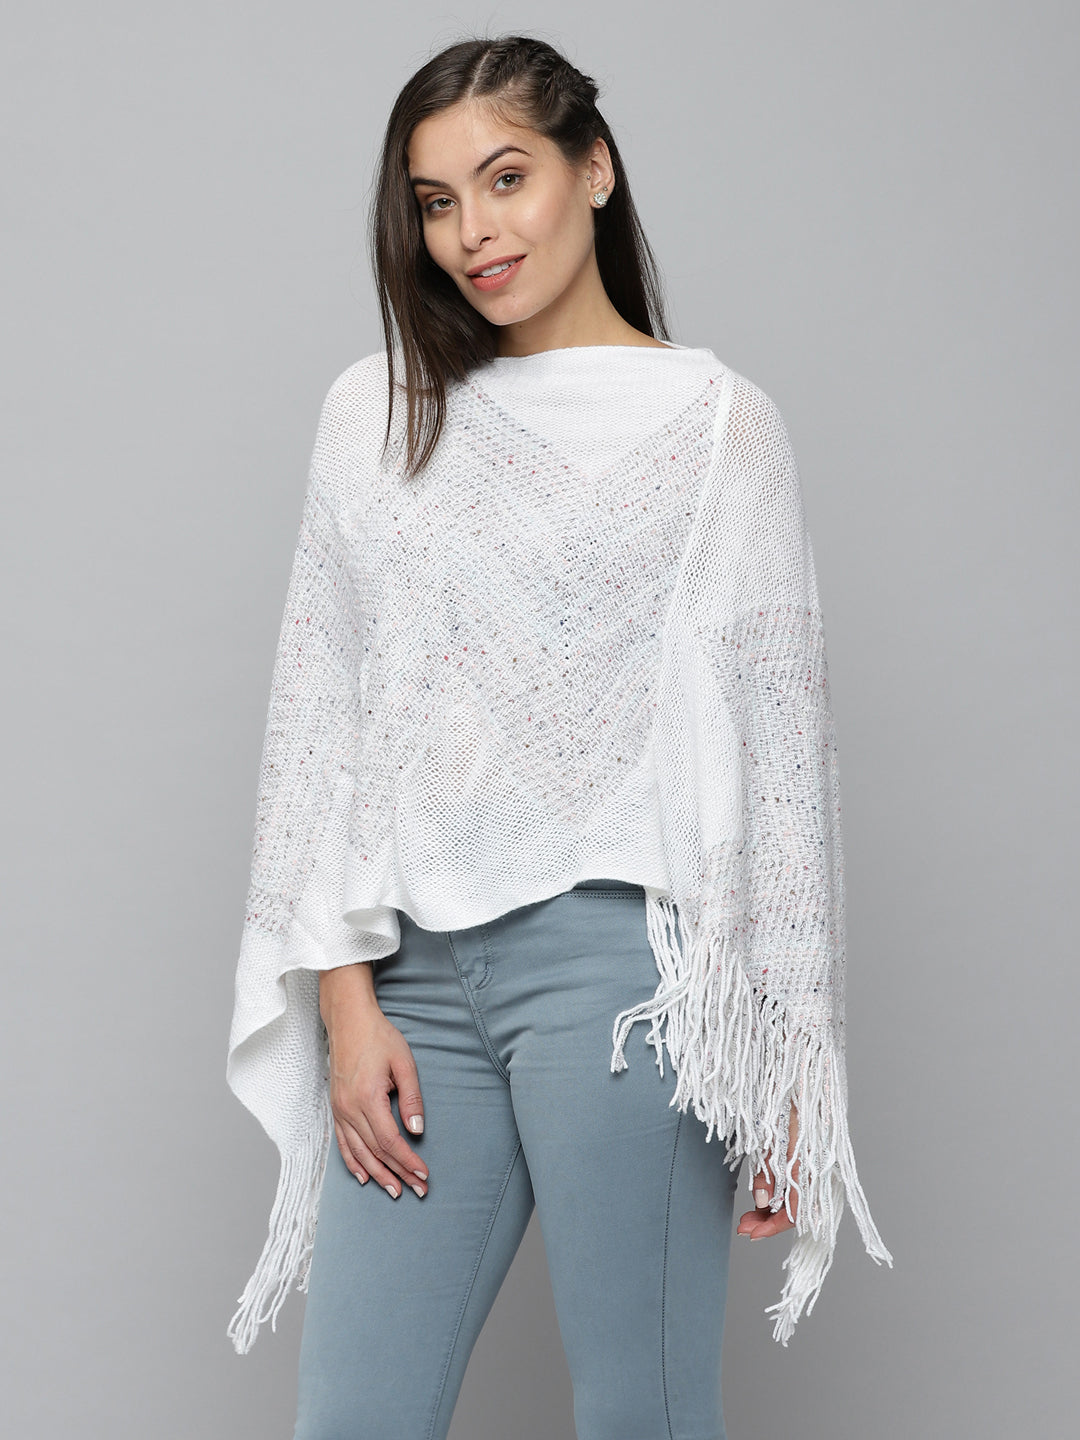 Women's White Solid Poncho Sweater